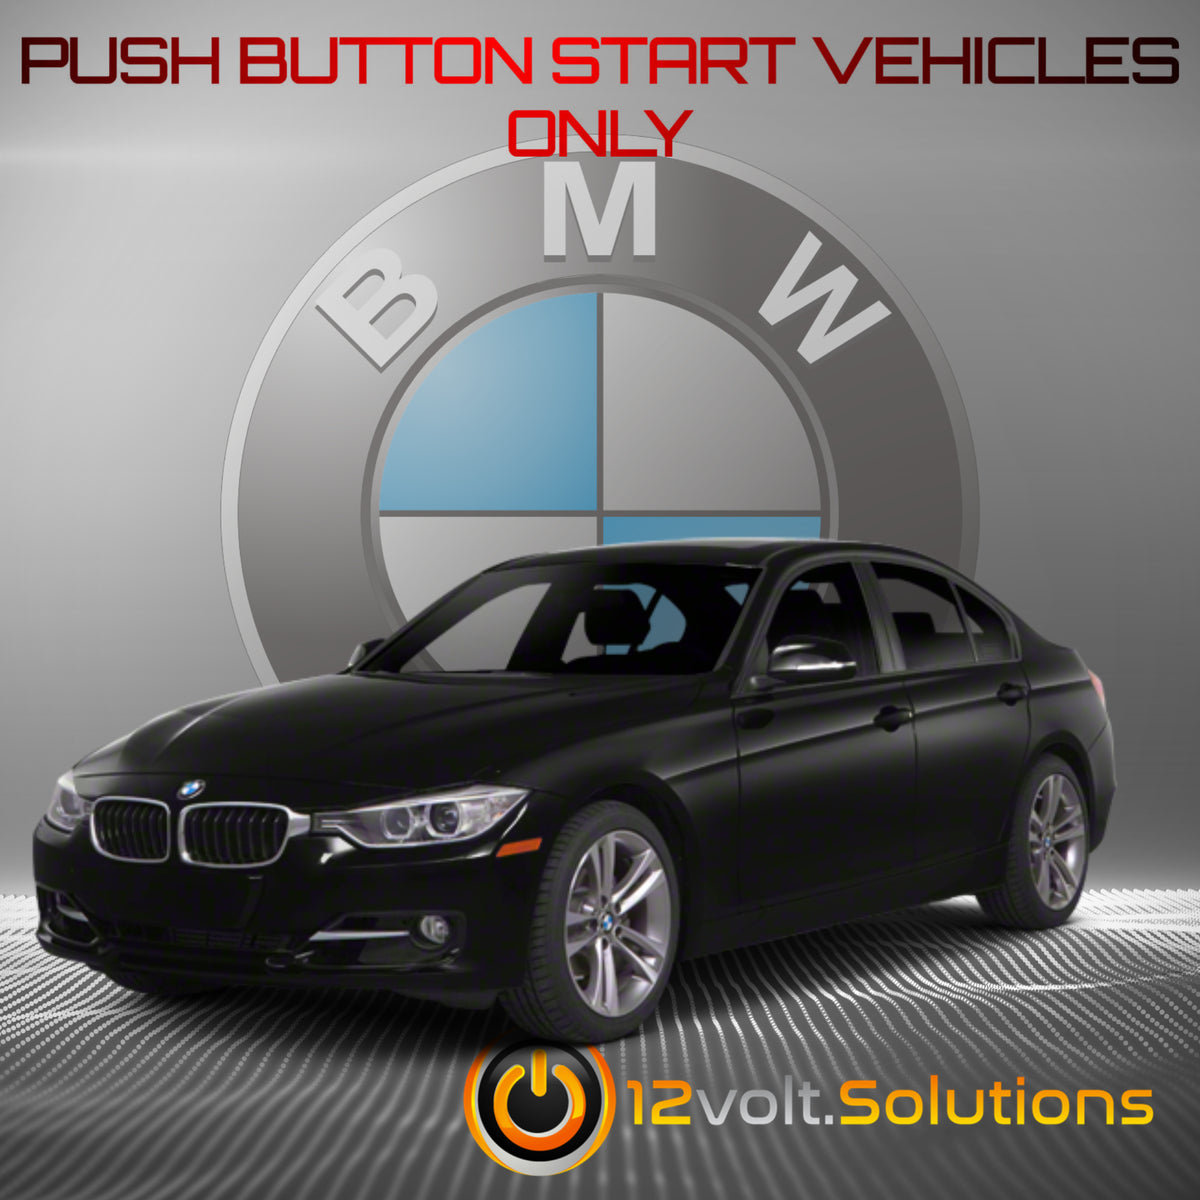 2006-2013 BMW 3-Series Plug and Play Remote Start Kit (Push Button Start)-12Volt.Solutions